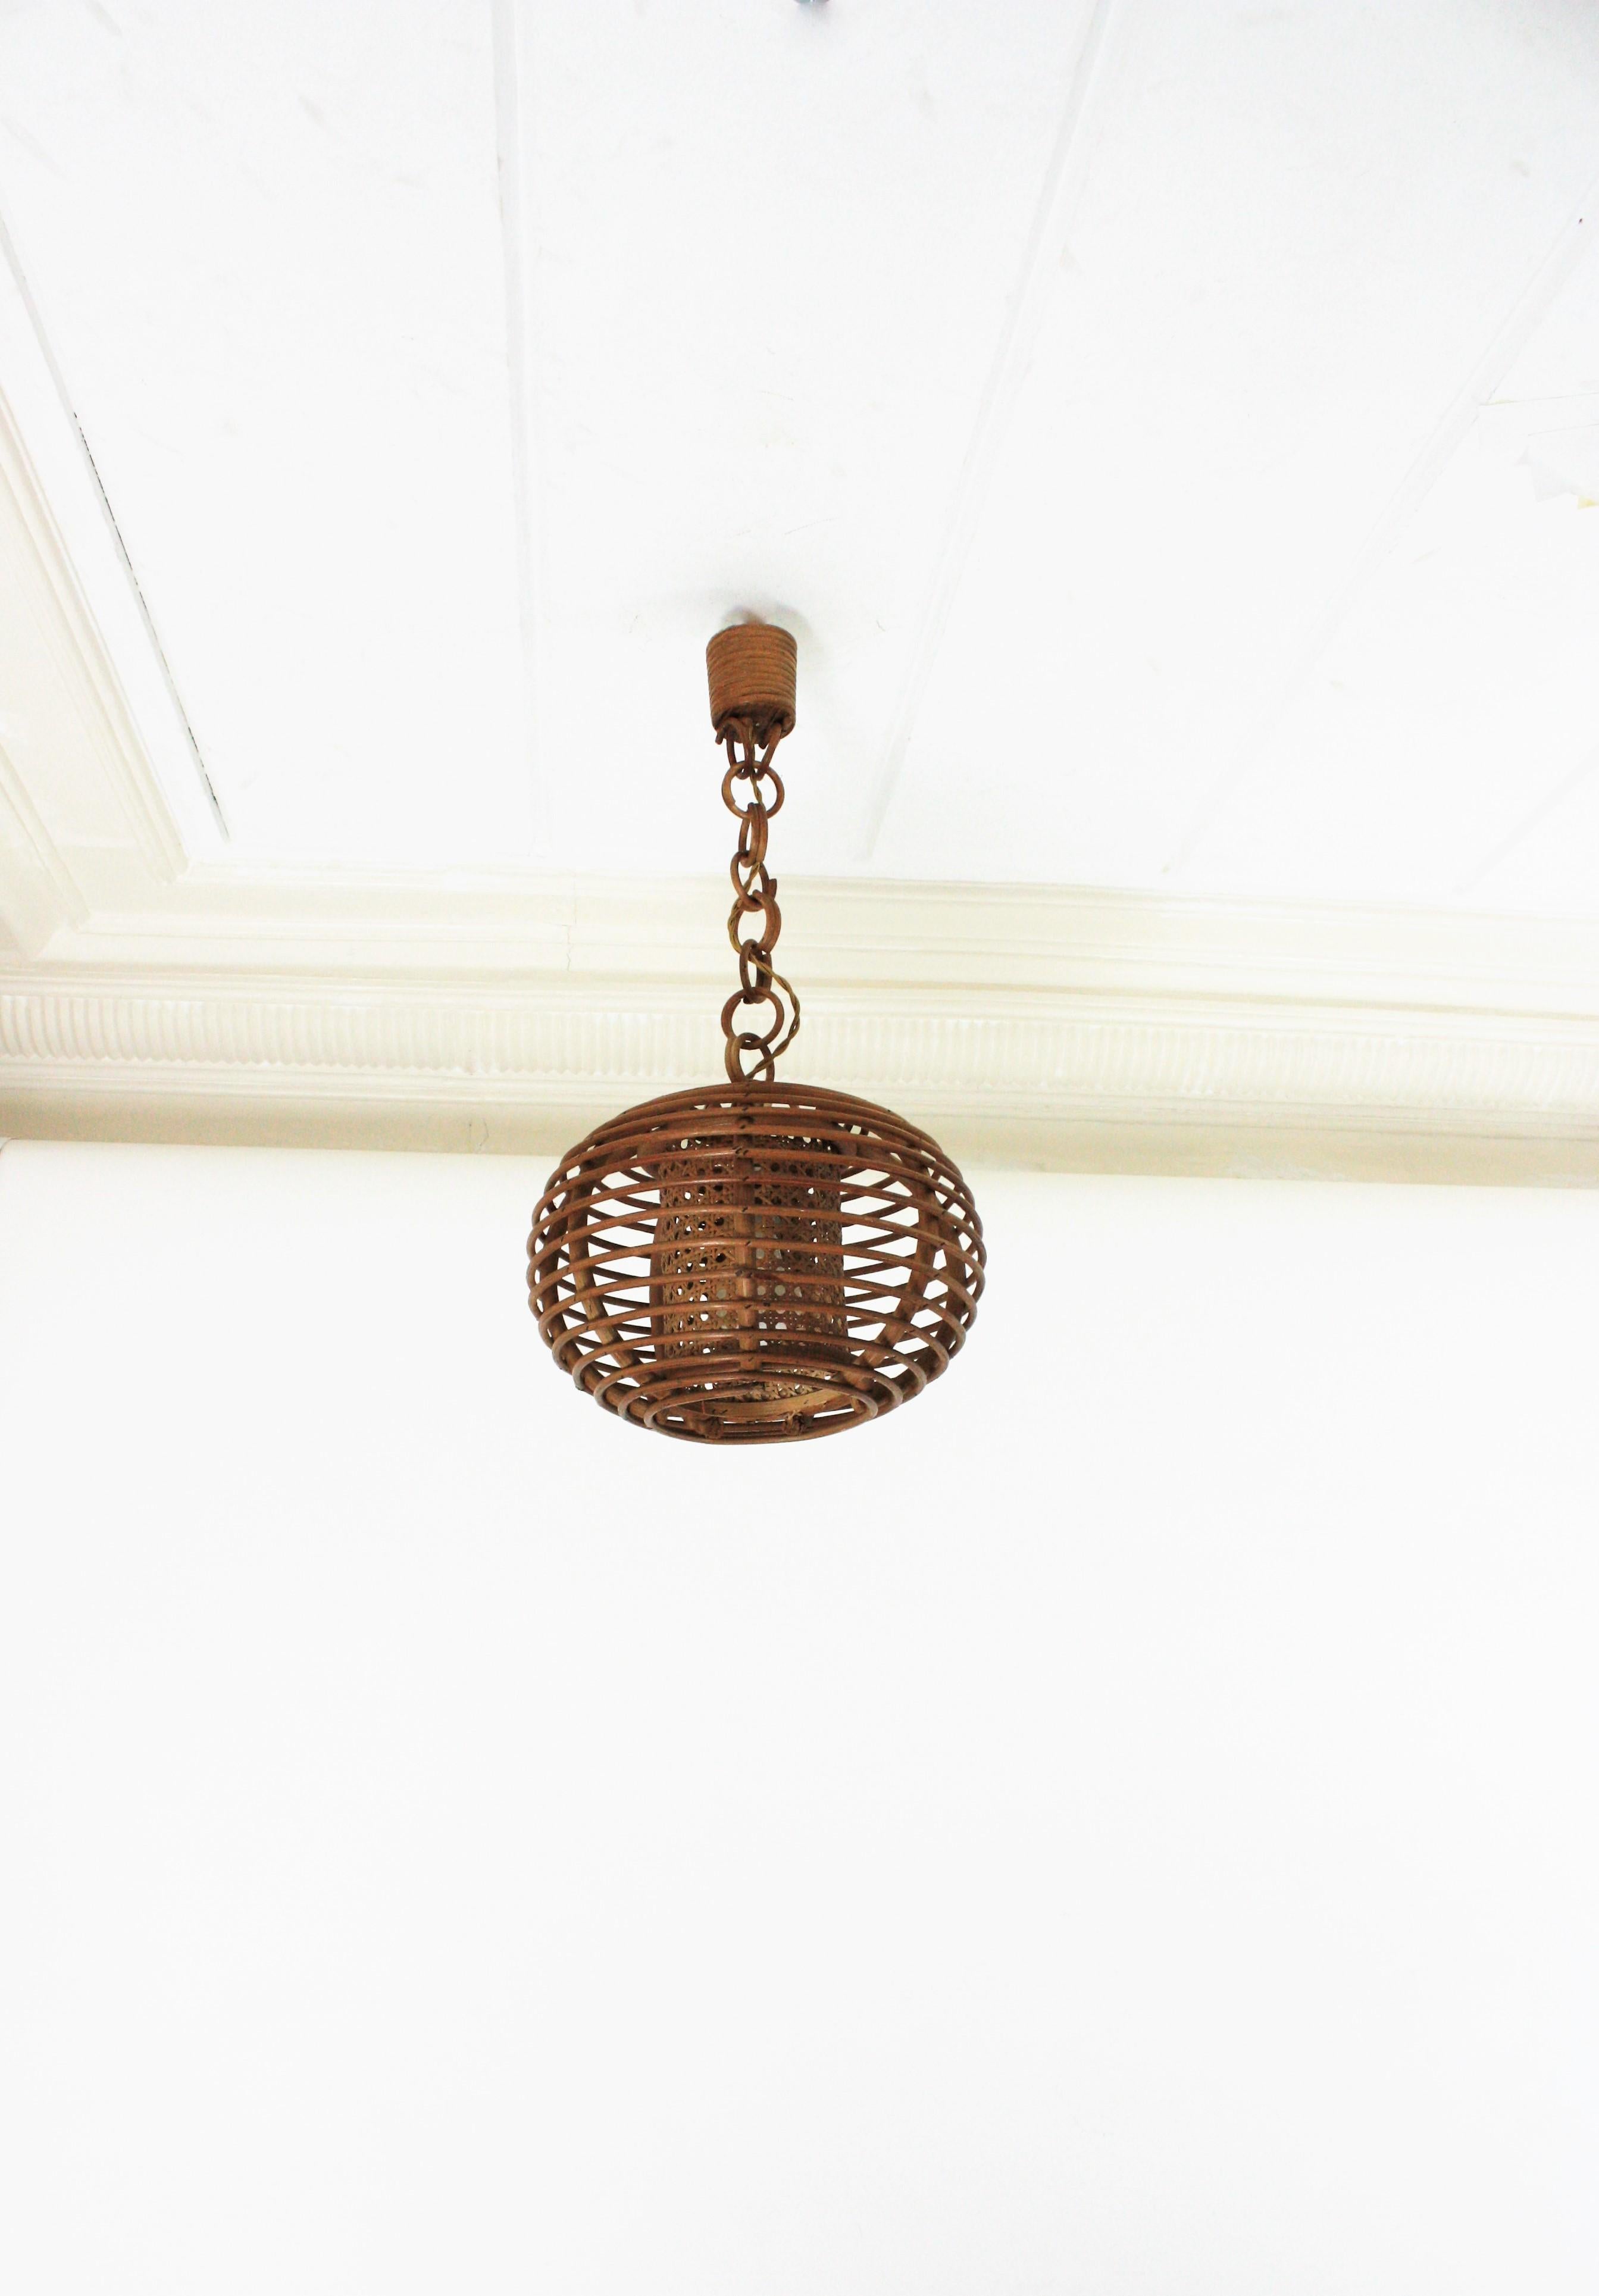 Eye-catching rattan lantern with globe or ball shaped lampshade, Spain, 1950-1960s.
This suspension lamps is entirely handcrafted with rattan, bamboo and wicker. The ball shaped shade hang from a chain with round rattan links that can be shortened